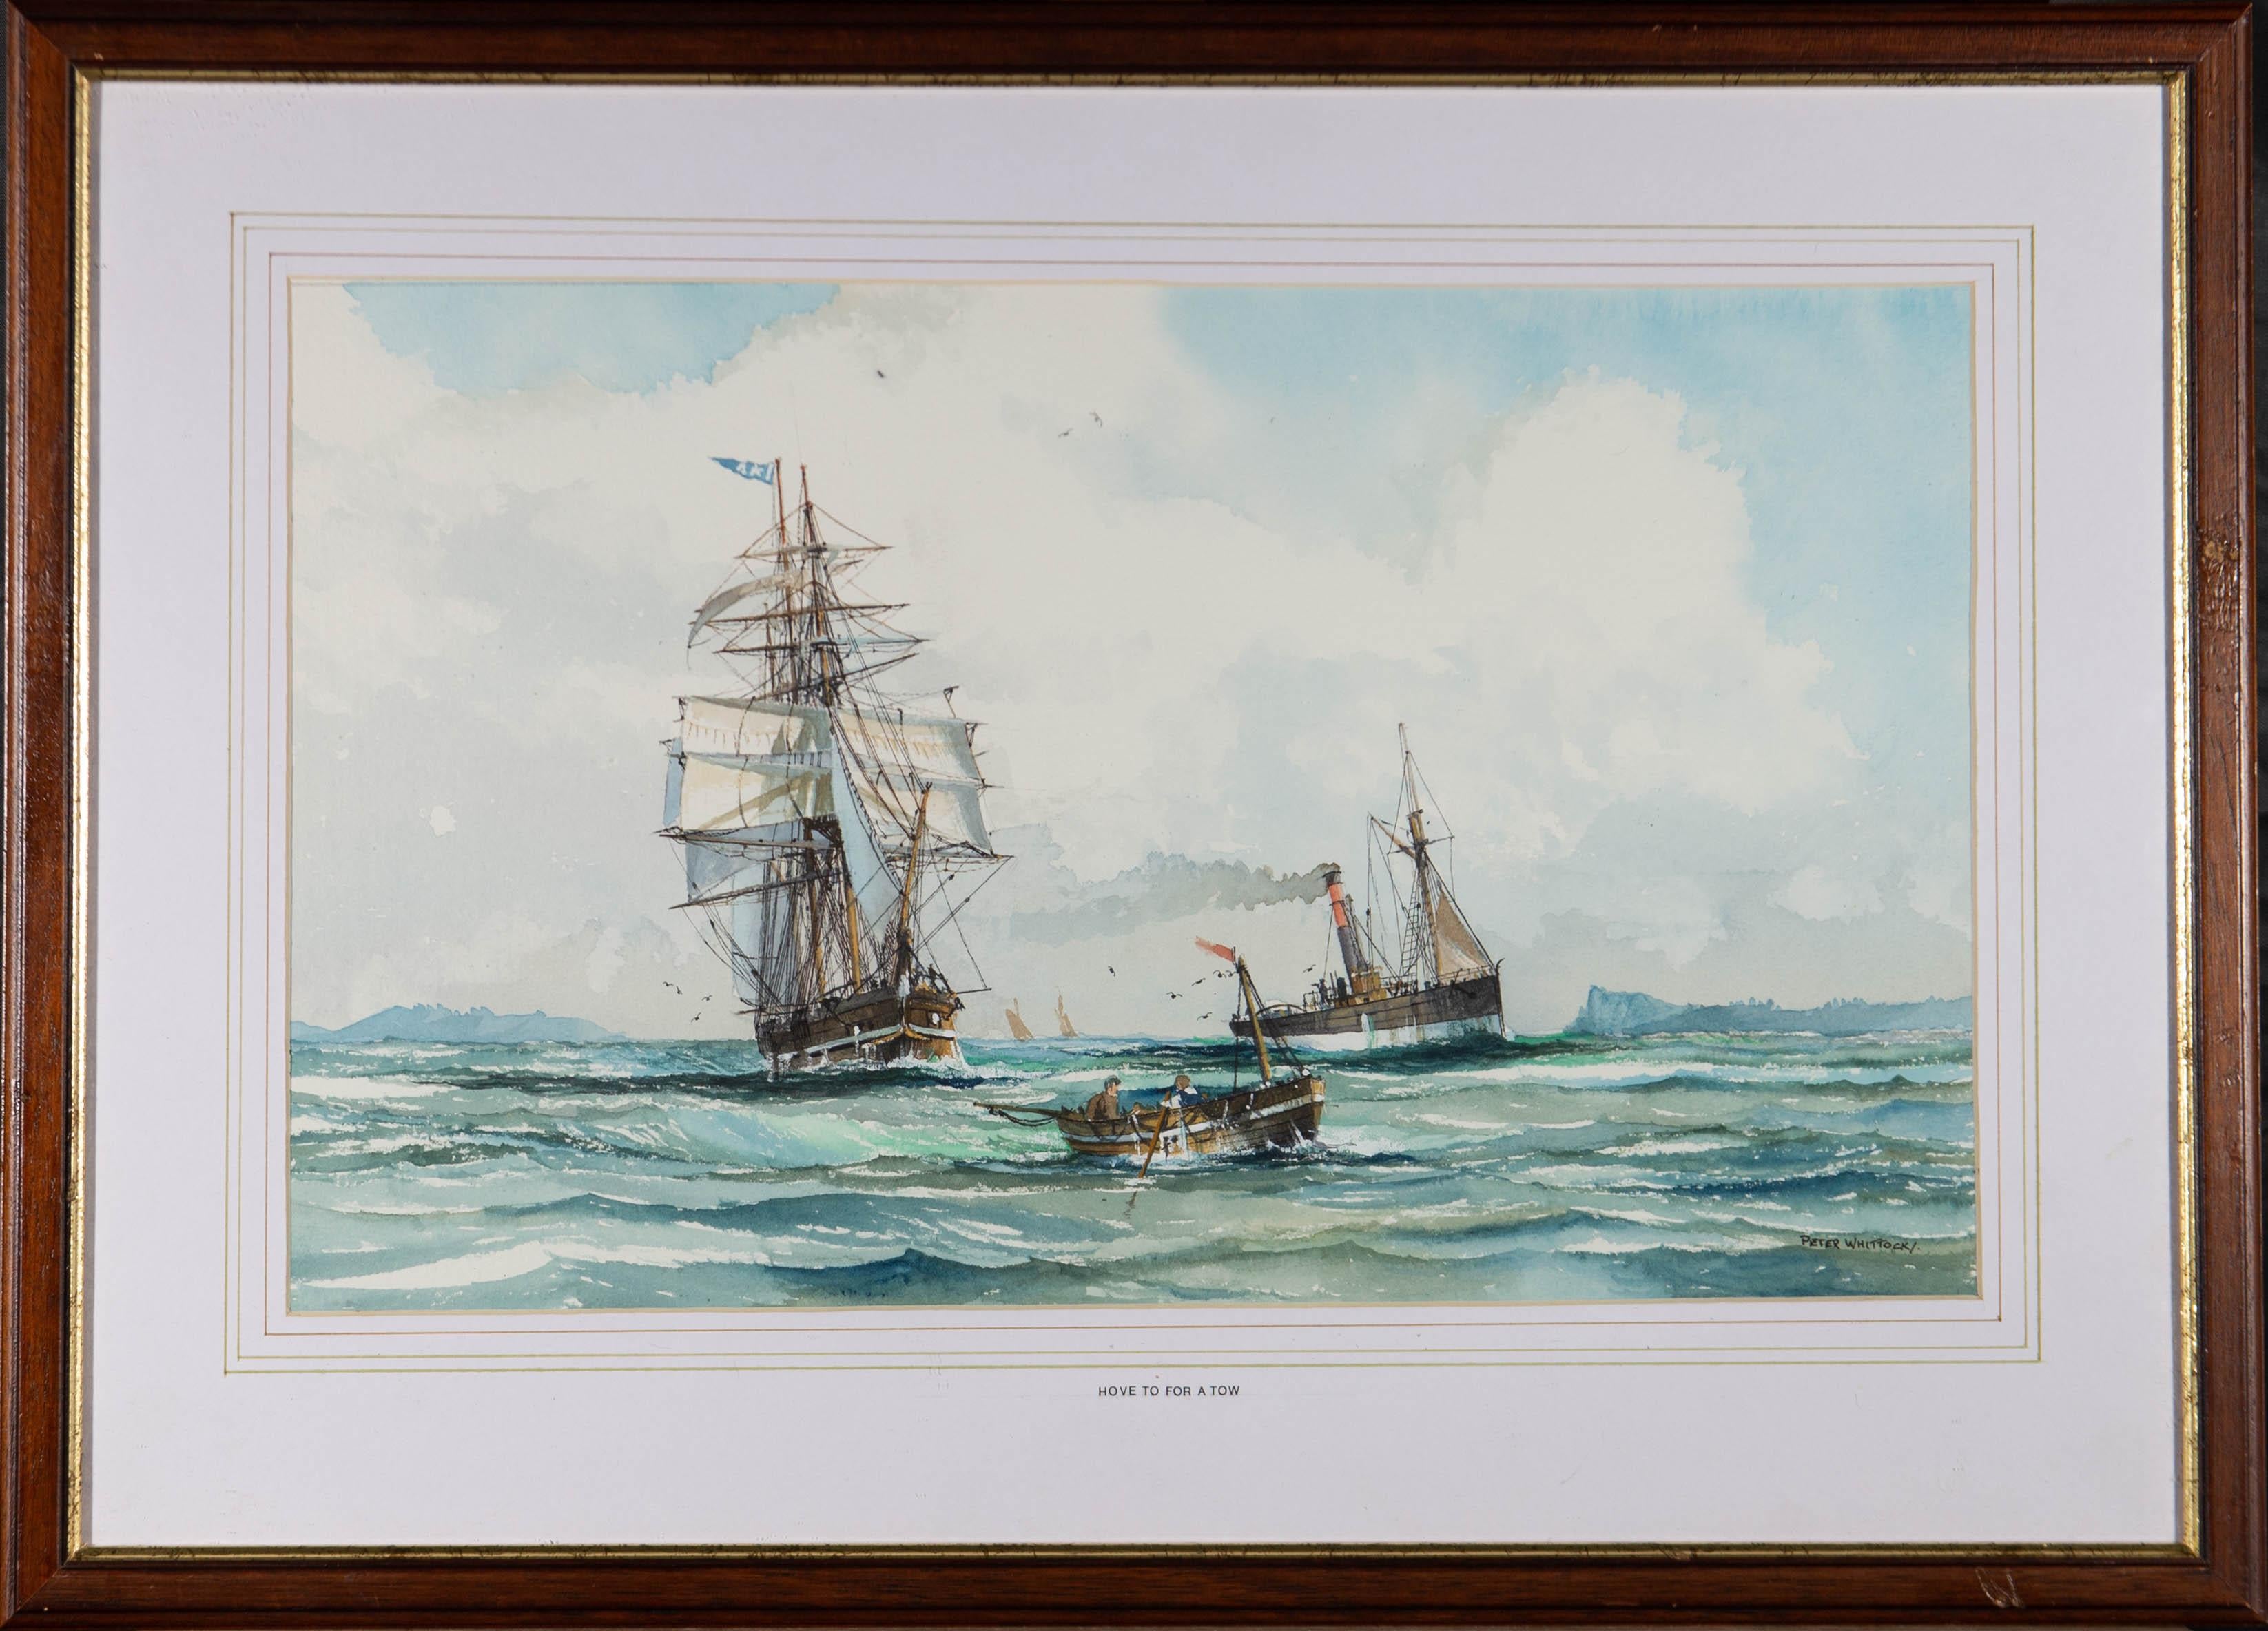 A watercolour piece showing ships on the sea with a row boat containing two figures in the foreground. Well presented in a wash line mount and wooden frame. The title is inscribed to the lower edge and the artist has signed in the lower right. On